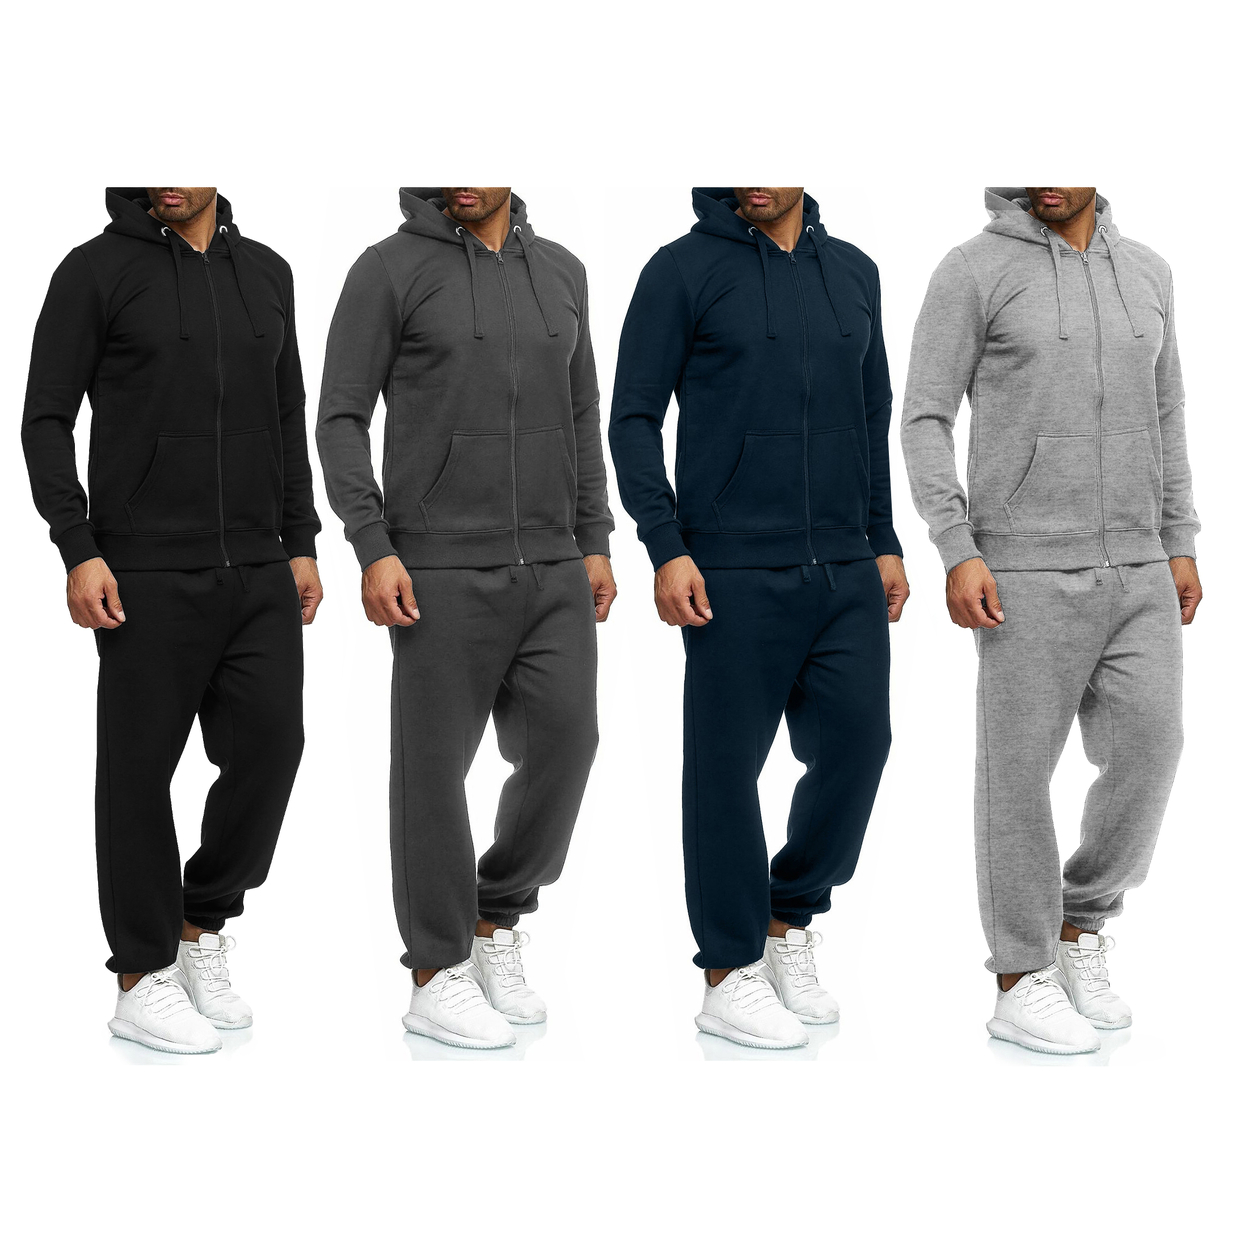 Multi-Pack: Men's Casual Big & Tall Athletic Active Winter Warm Fleece Lined Full Zip Tracksuit Jogger Set - Black, 1-pack, Xx-large